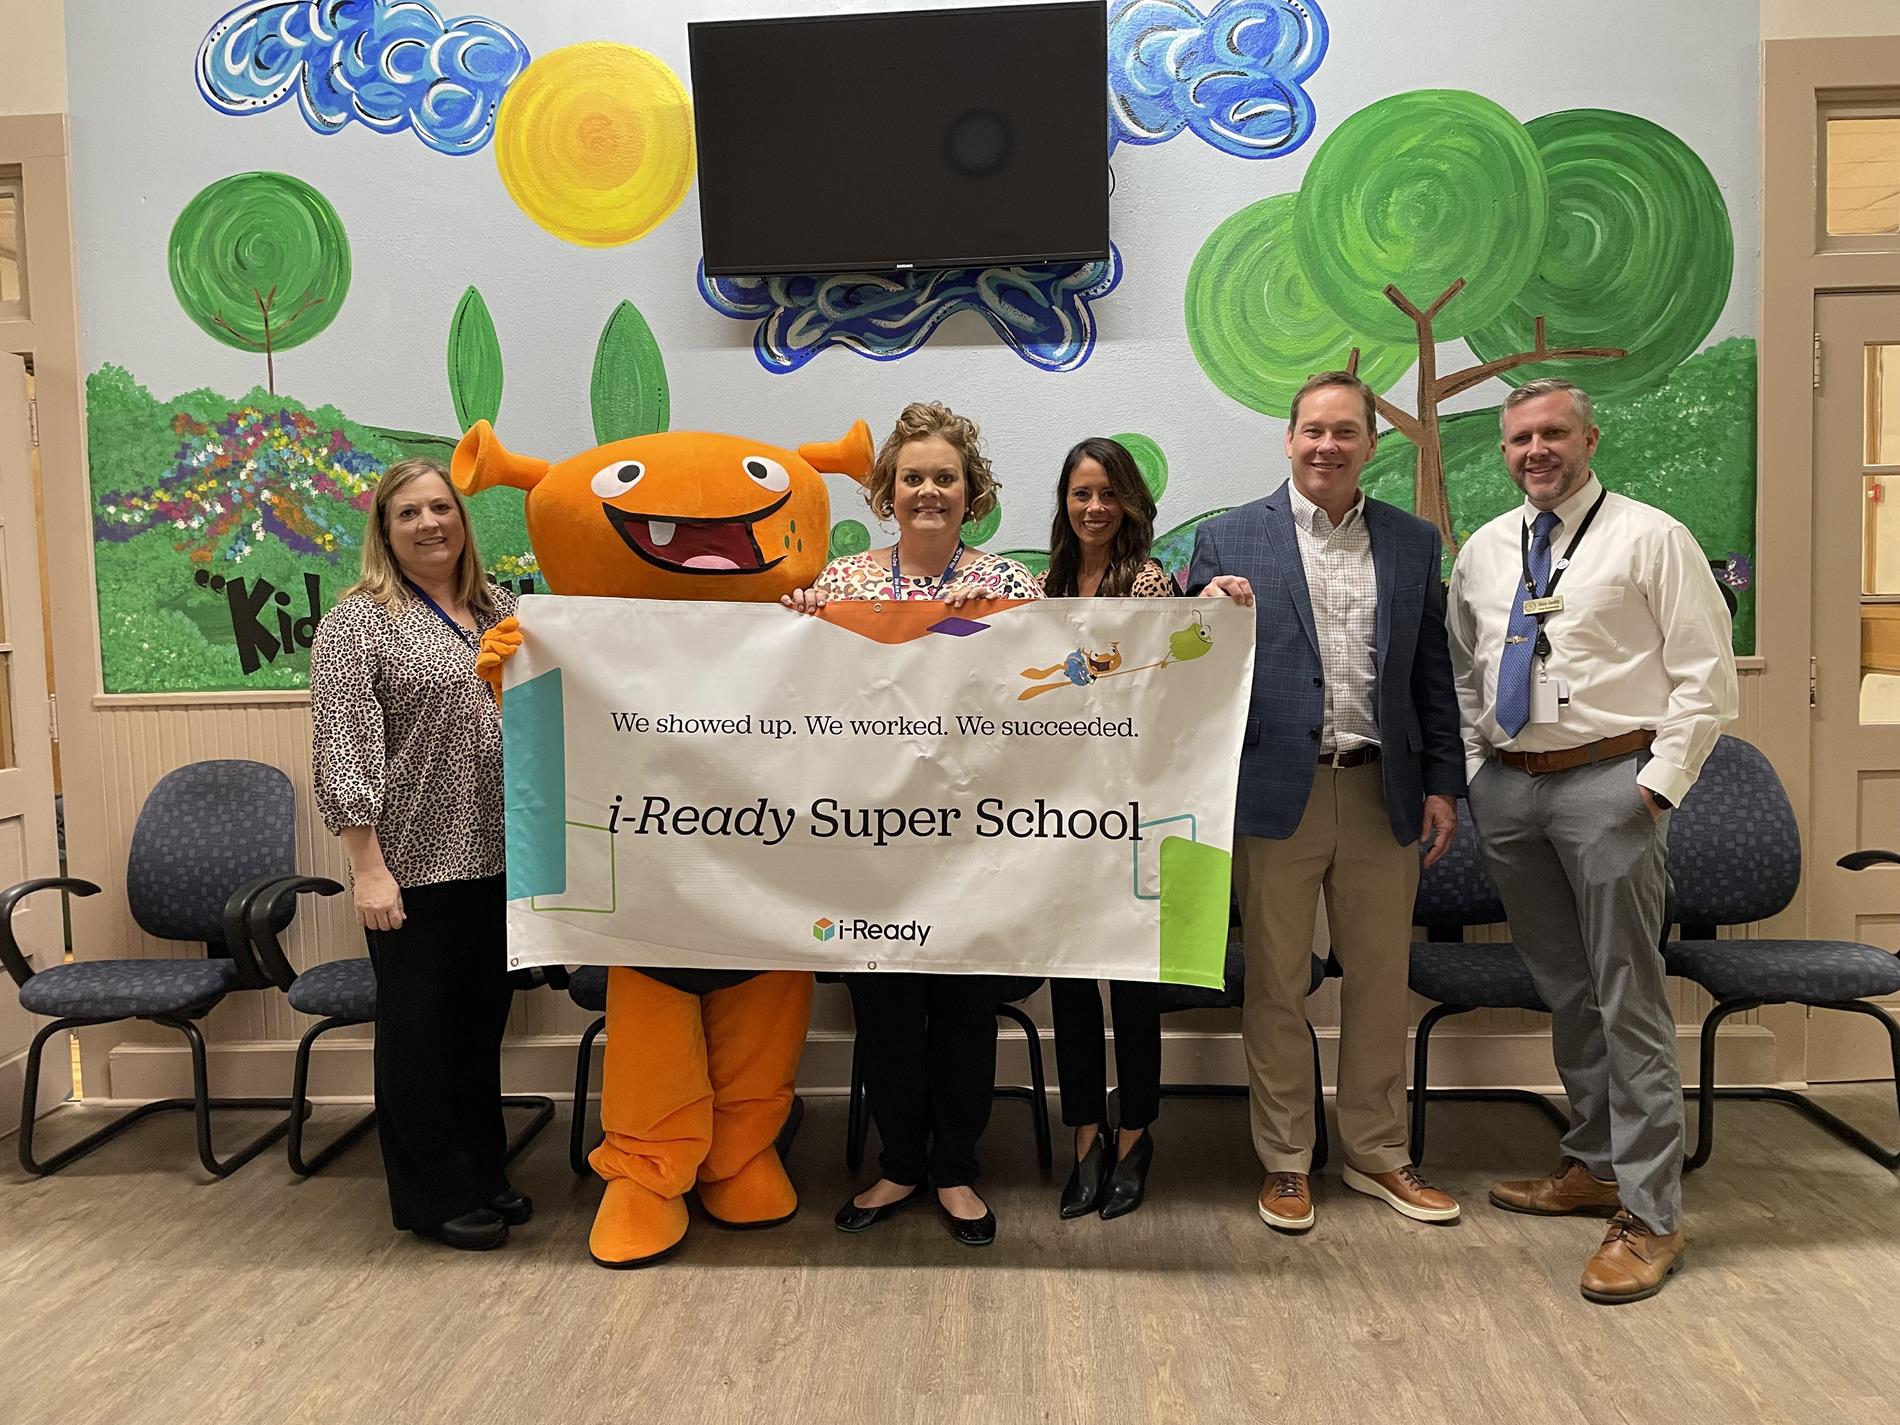 Huxford becomes an iReady Super School